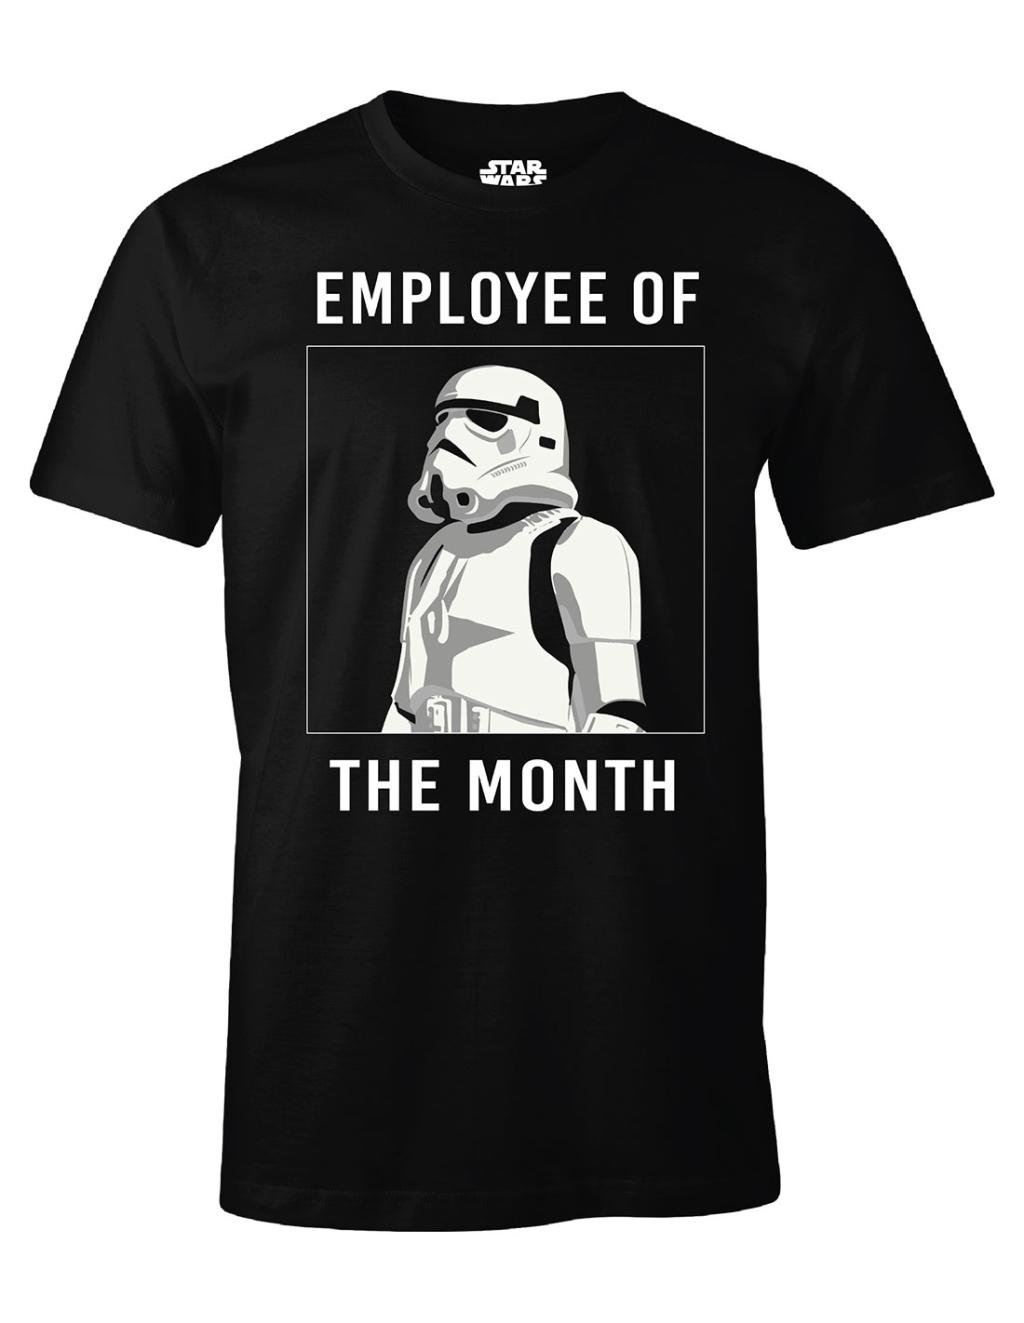 STAR WARS - Employee of the month - T-Shirt (S)